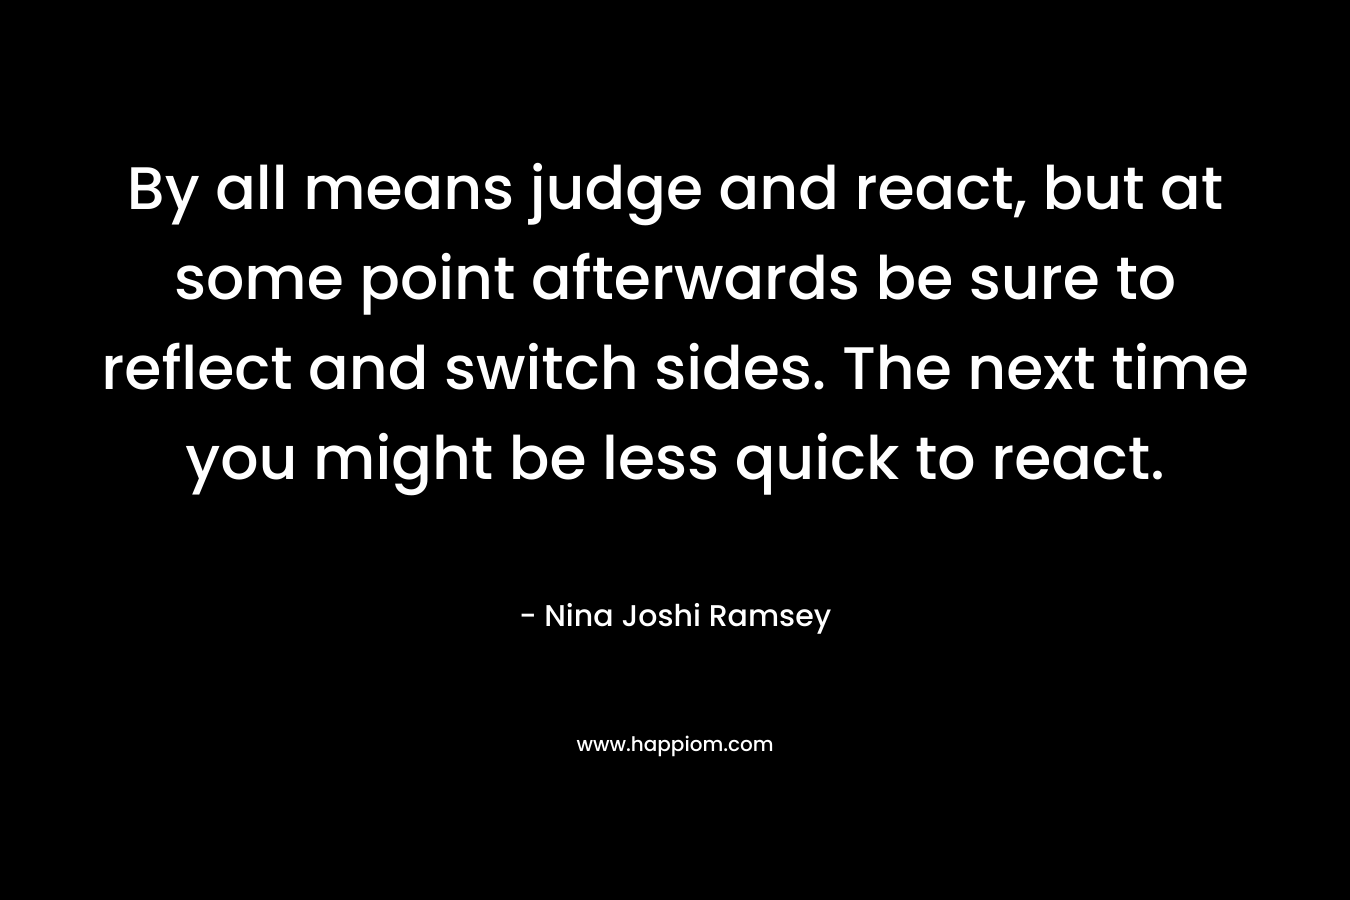 By all means judge and react, but at some point afterwards be sure to reflect and switch sides. The next time you might be less quick to react.